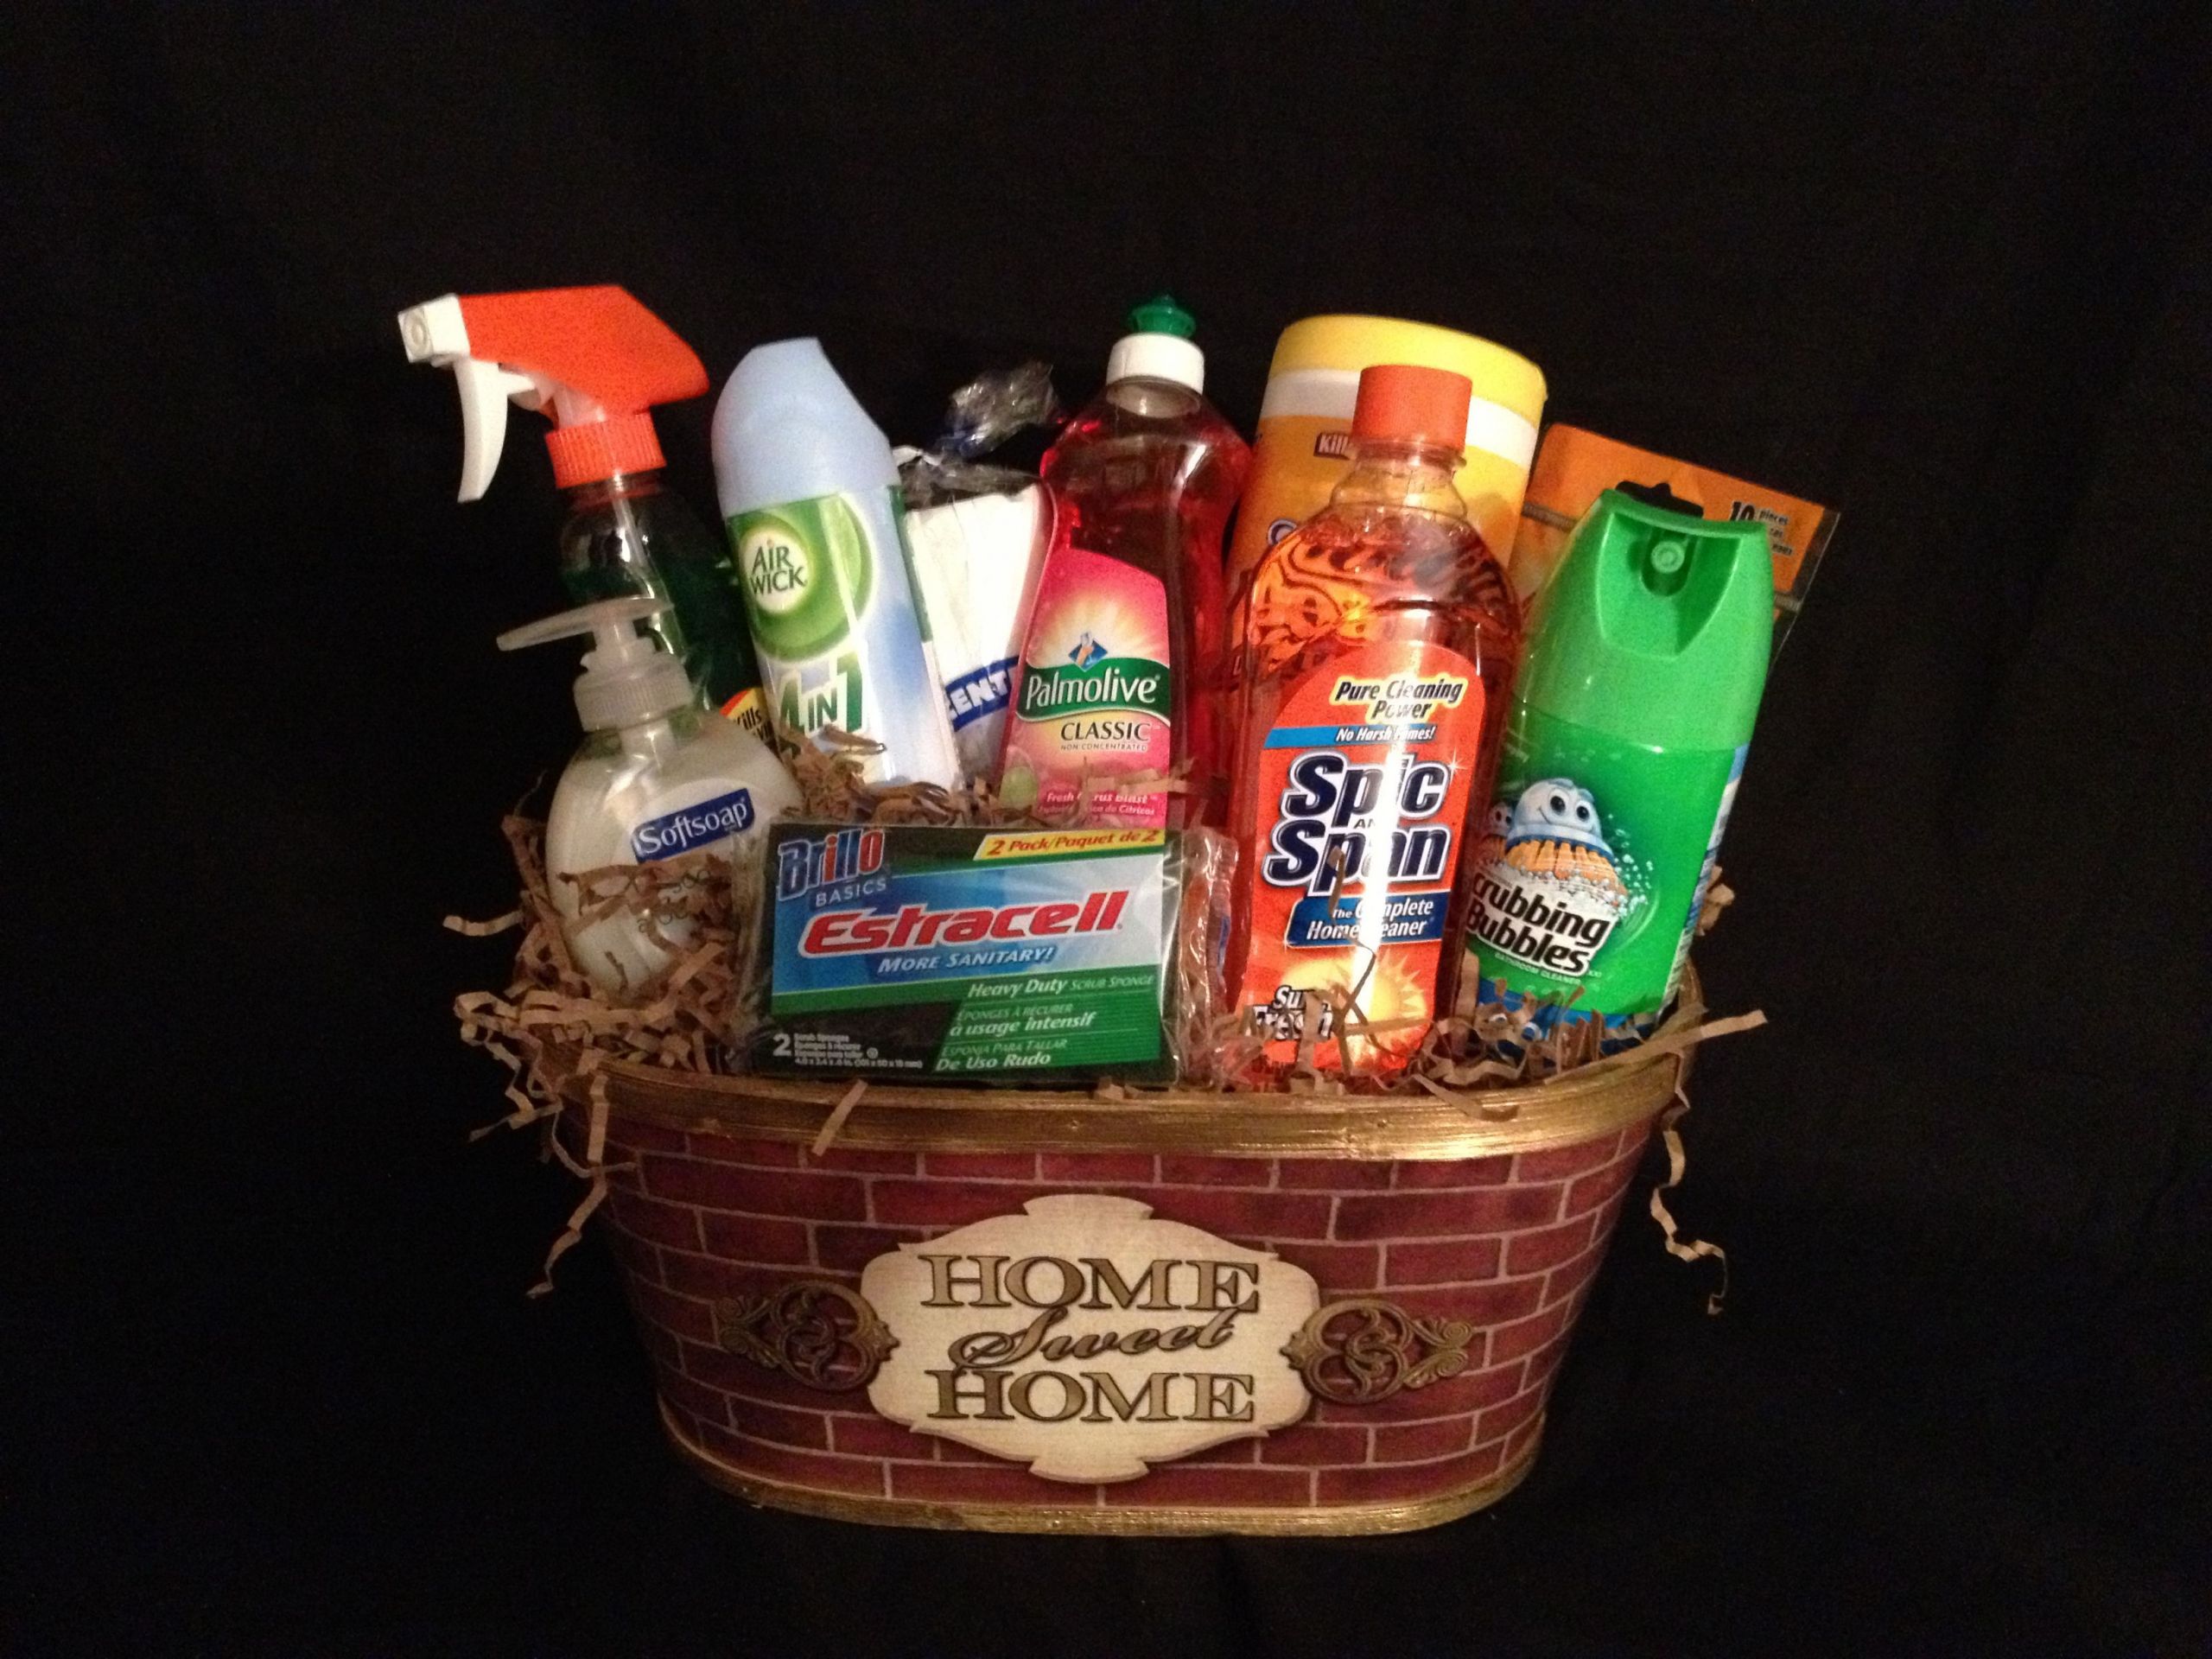 New Home Gift Basket Ideas
 Home Sweet Home Basket This basket contains the essential